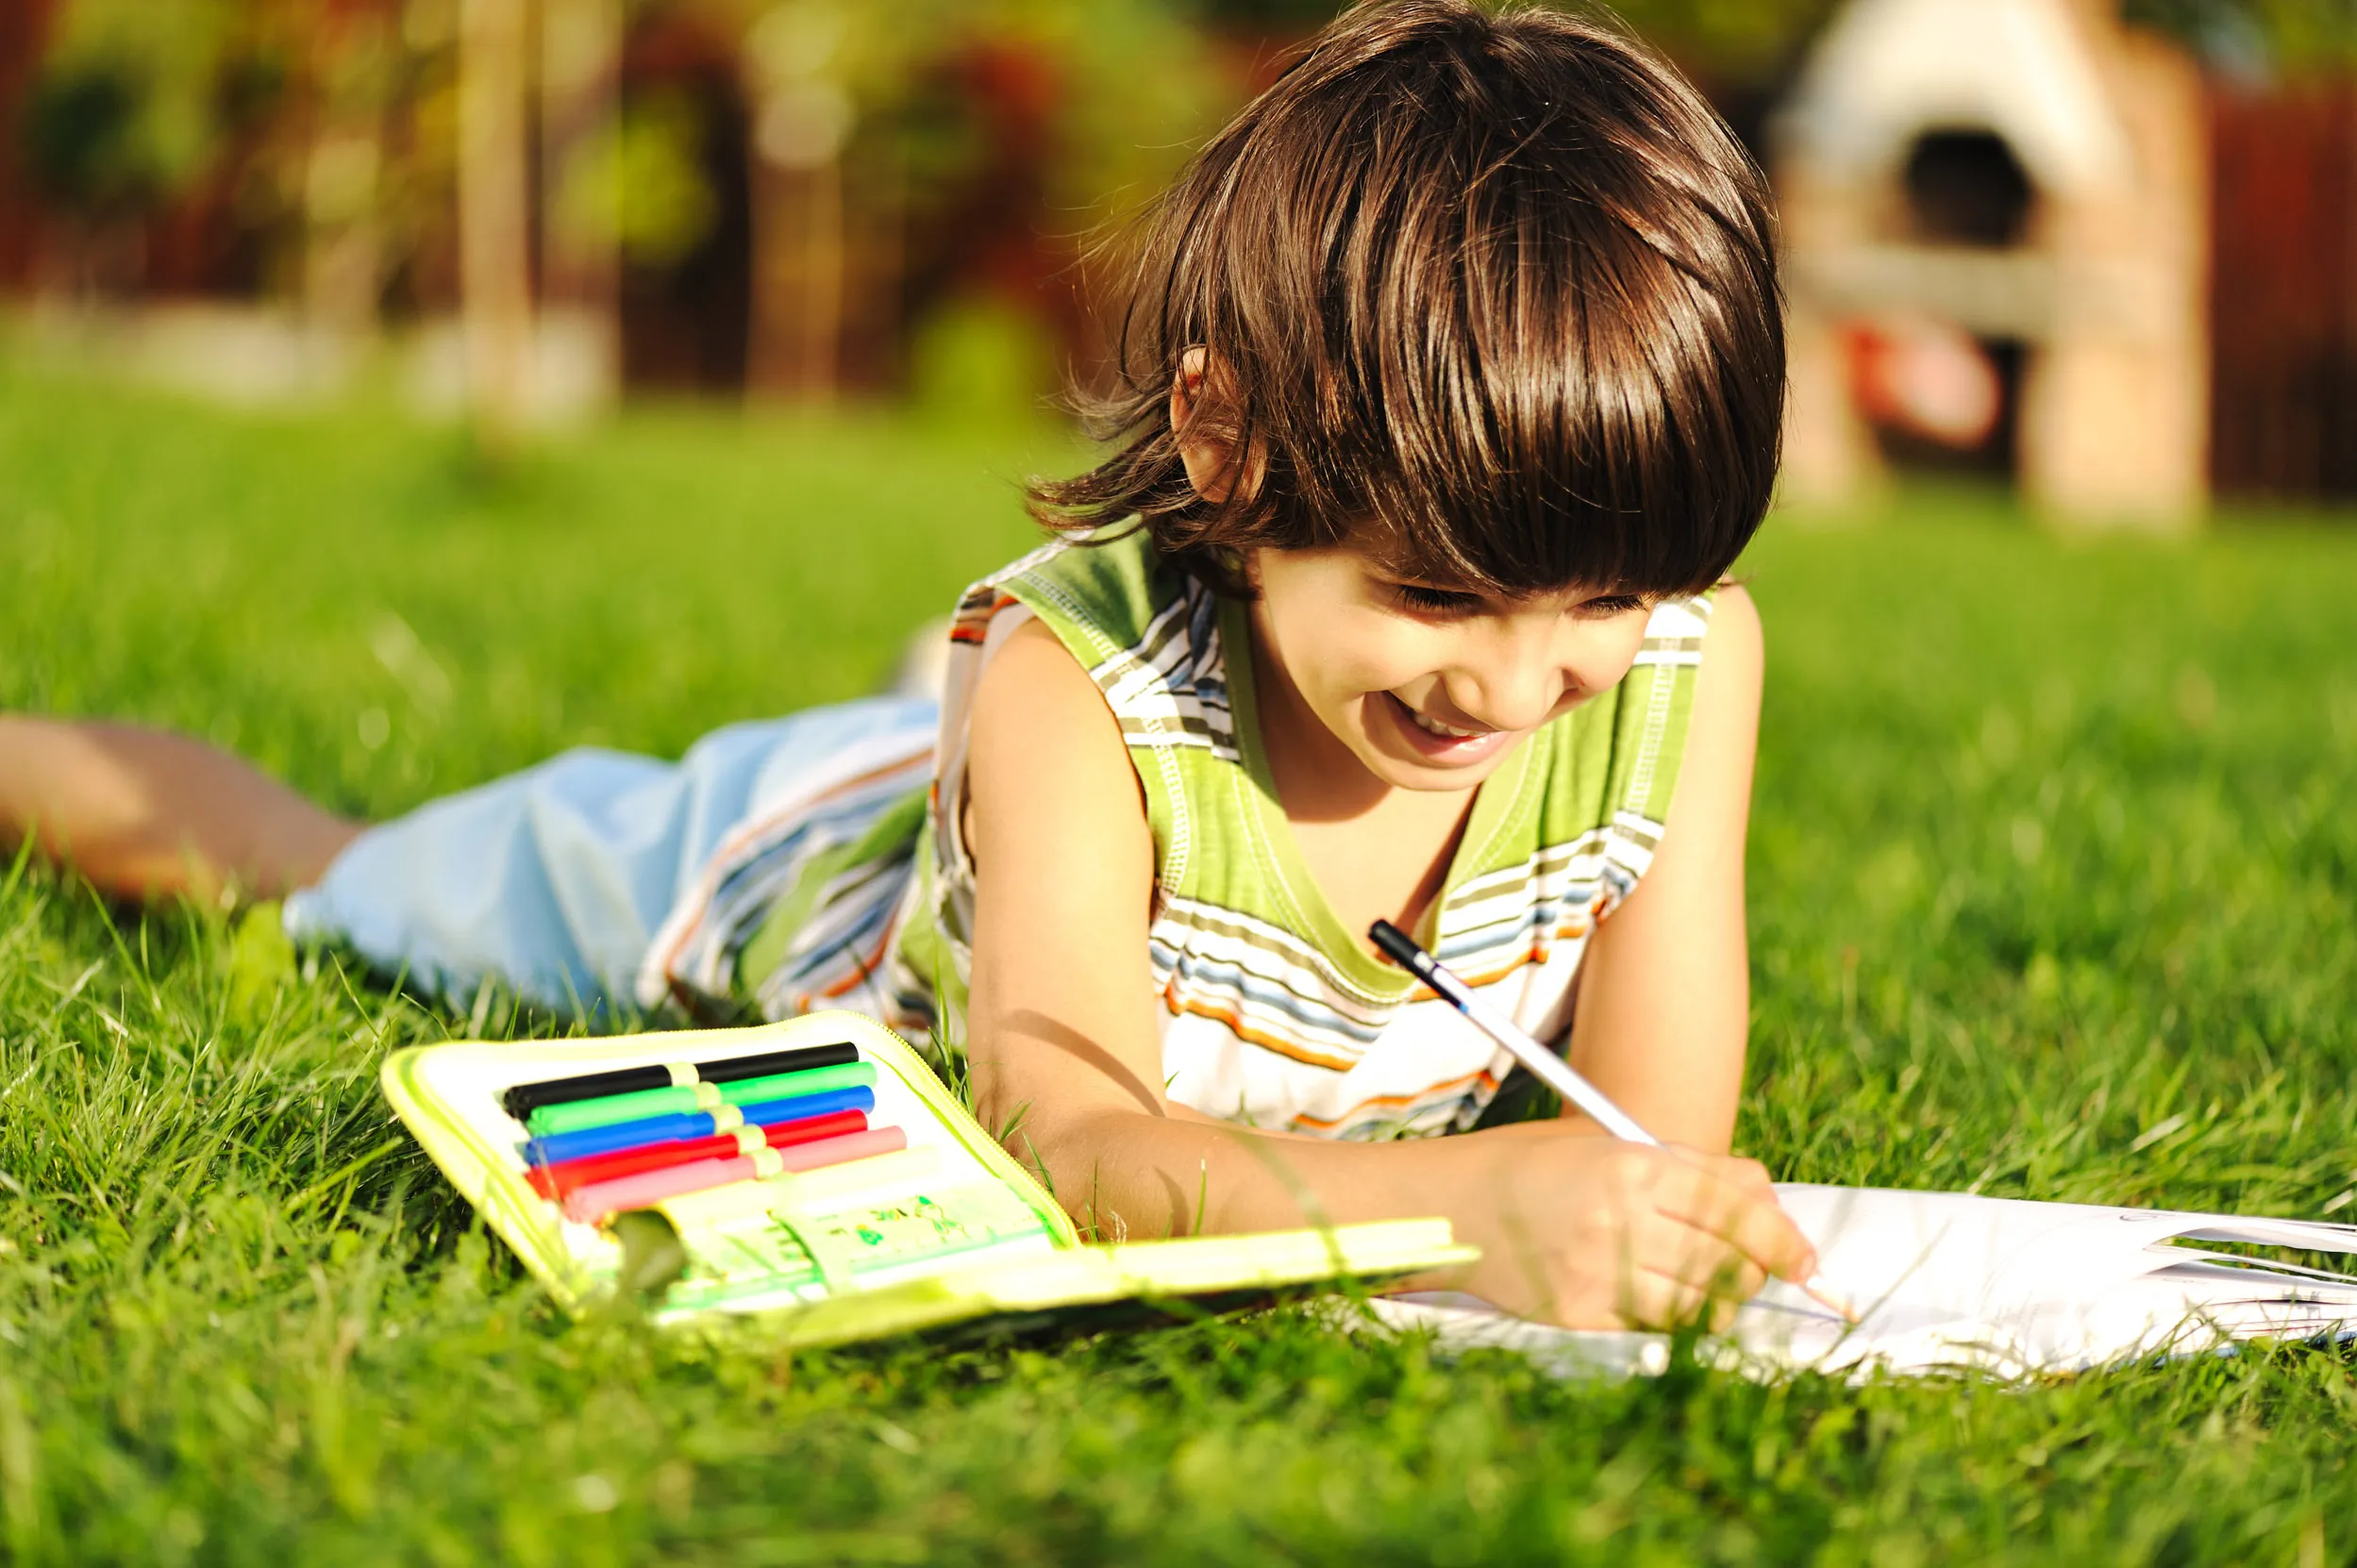 A child laying on a bed of grass with a pencil case and book.